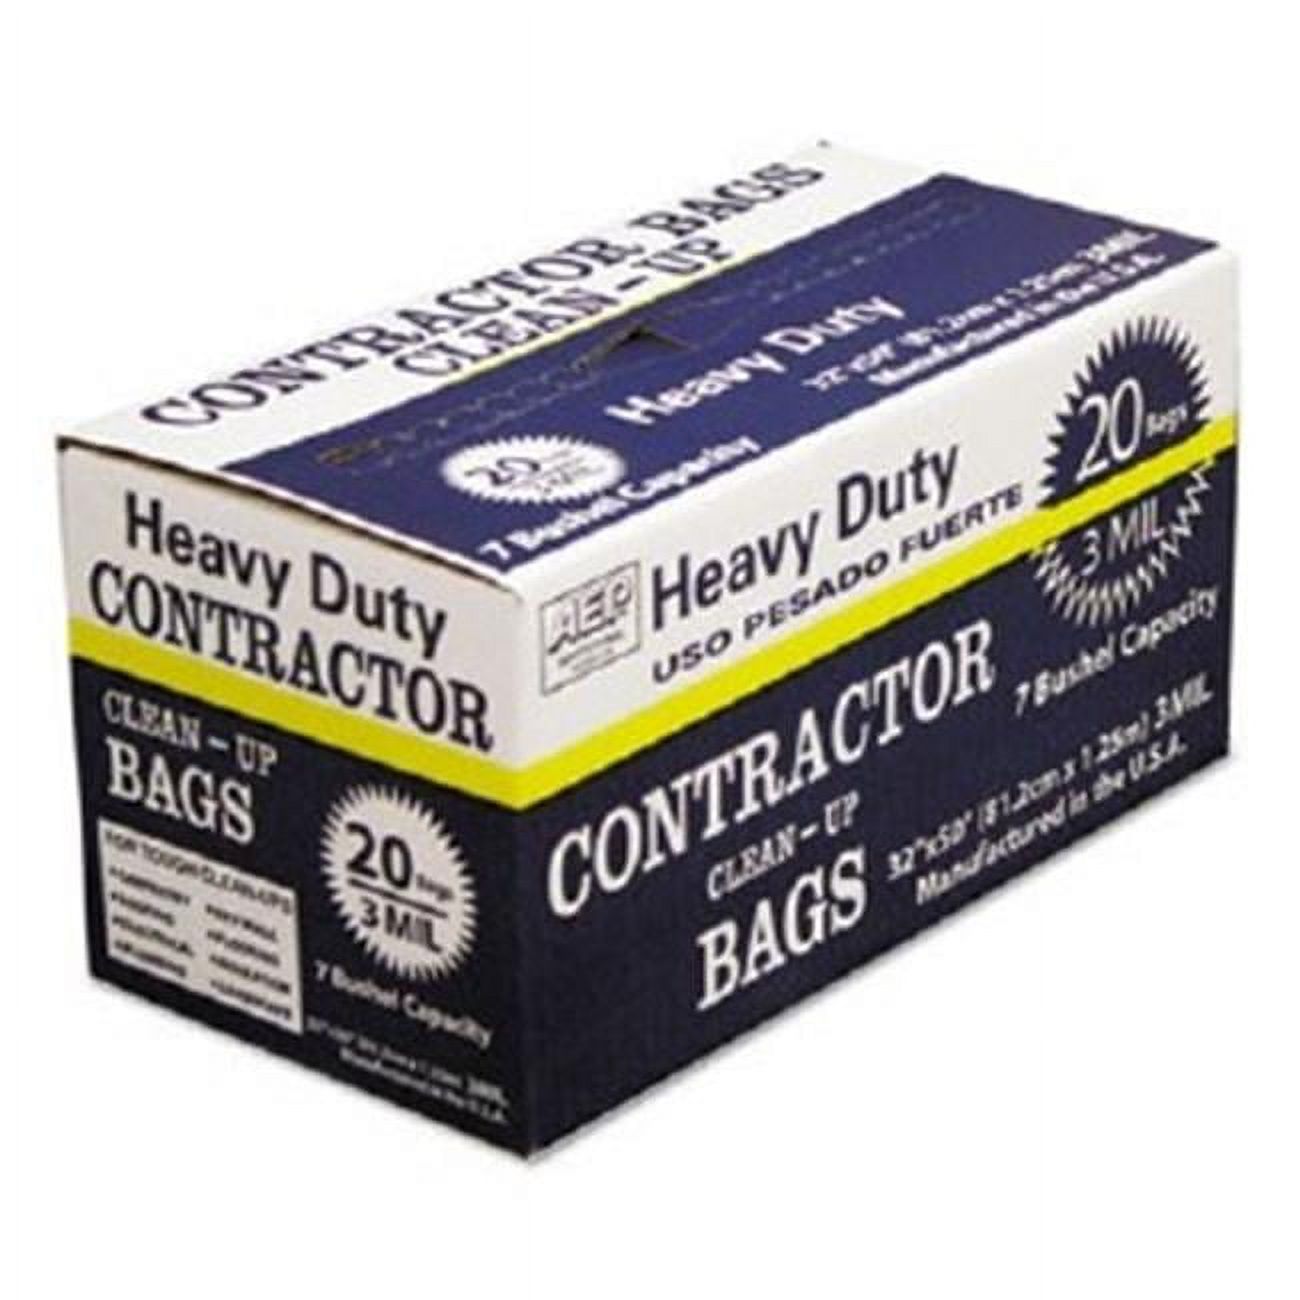 Webster Industries WBI0186470 32 x 50 in. Heavy-Duty Contractor Clean-up Bags - 55-60 gal, Black - 20 Carton - image 1 of 1